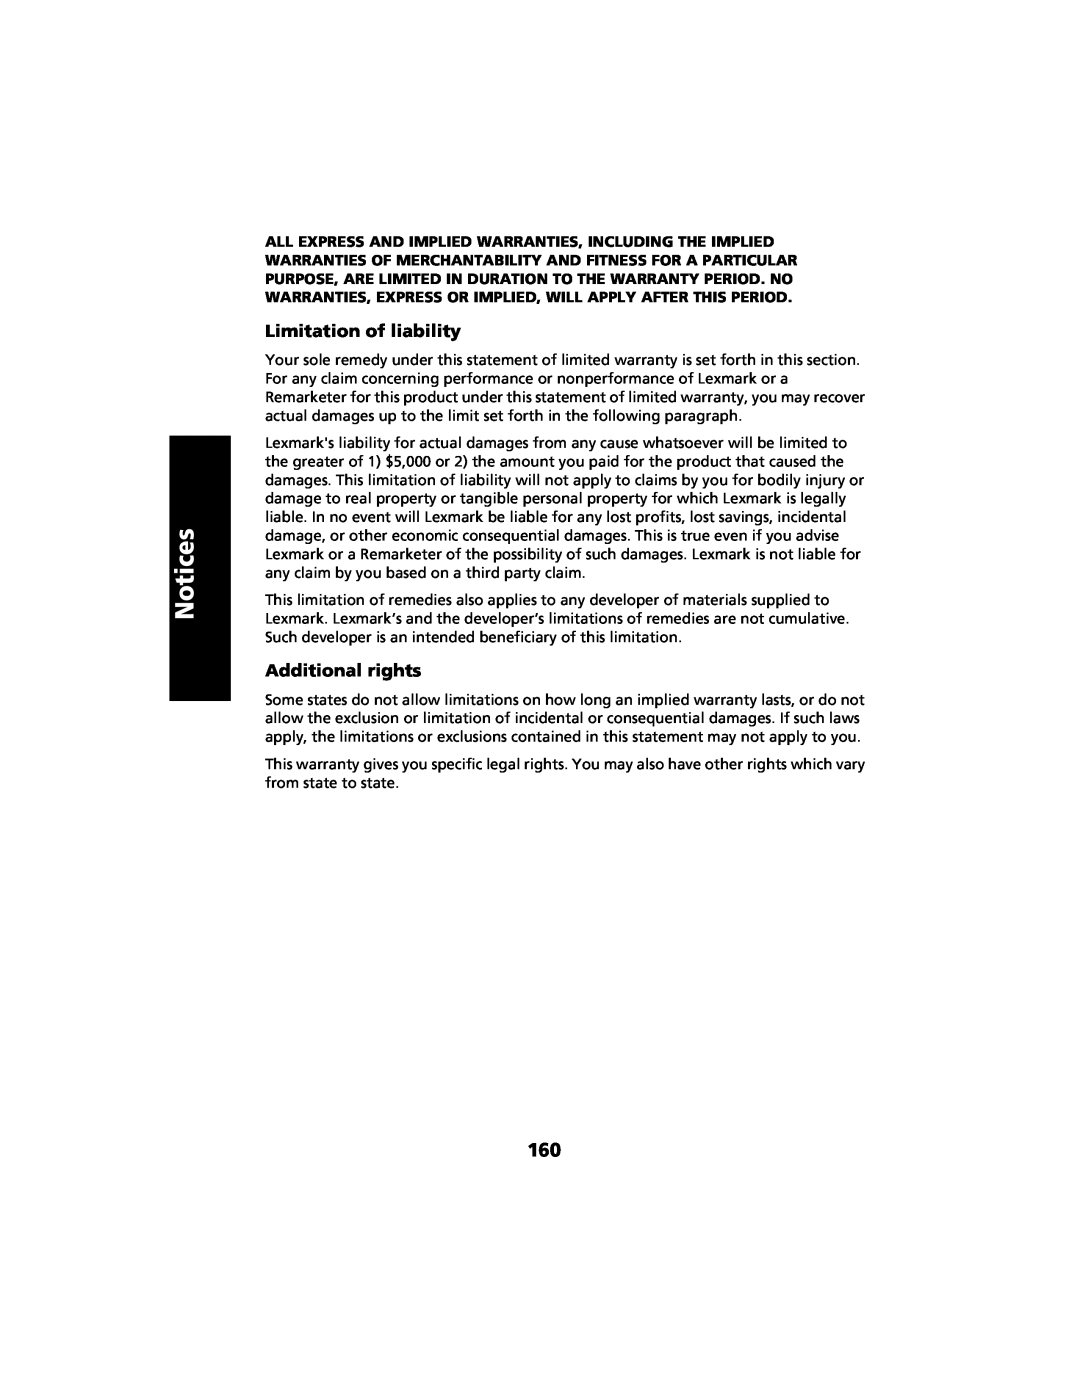 Lexmark 2480 manual Notices, Limitation of liability, Additional rights 